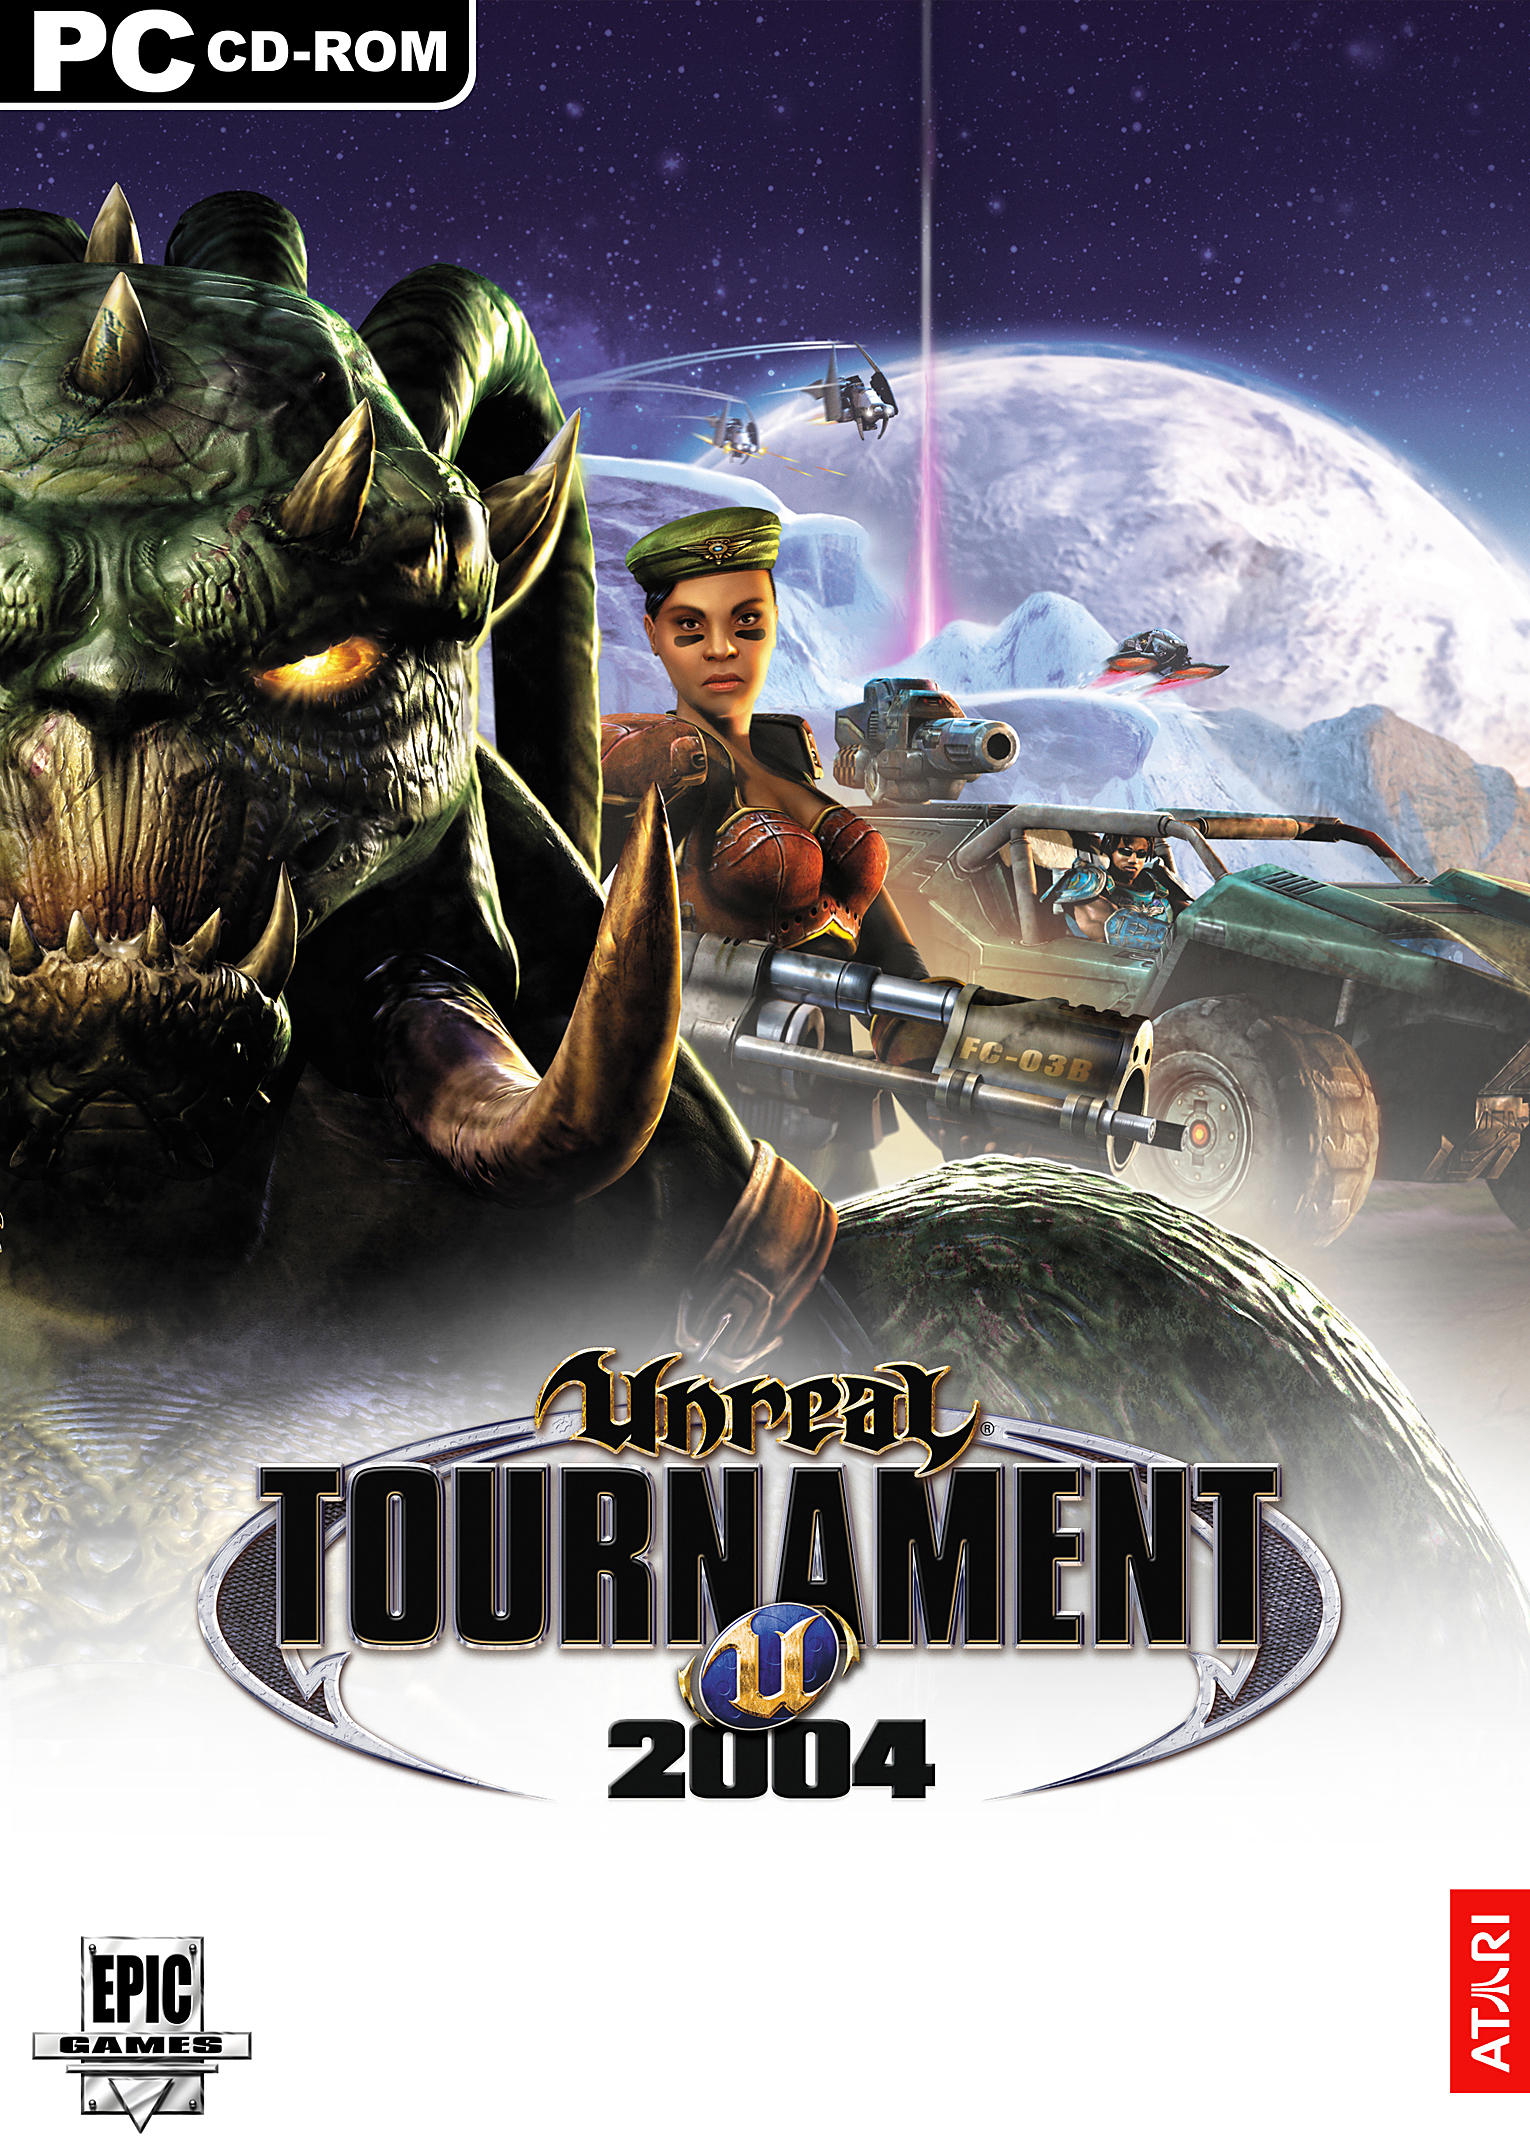 Unreal tournament 2004 on steam фото 19